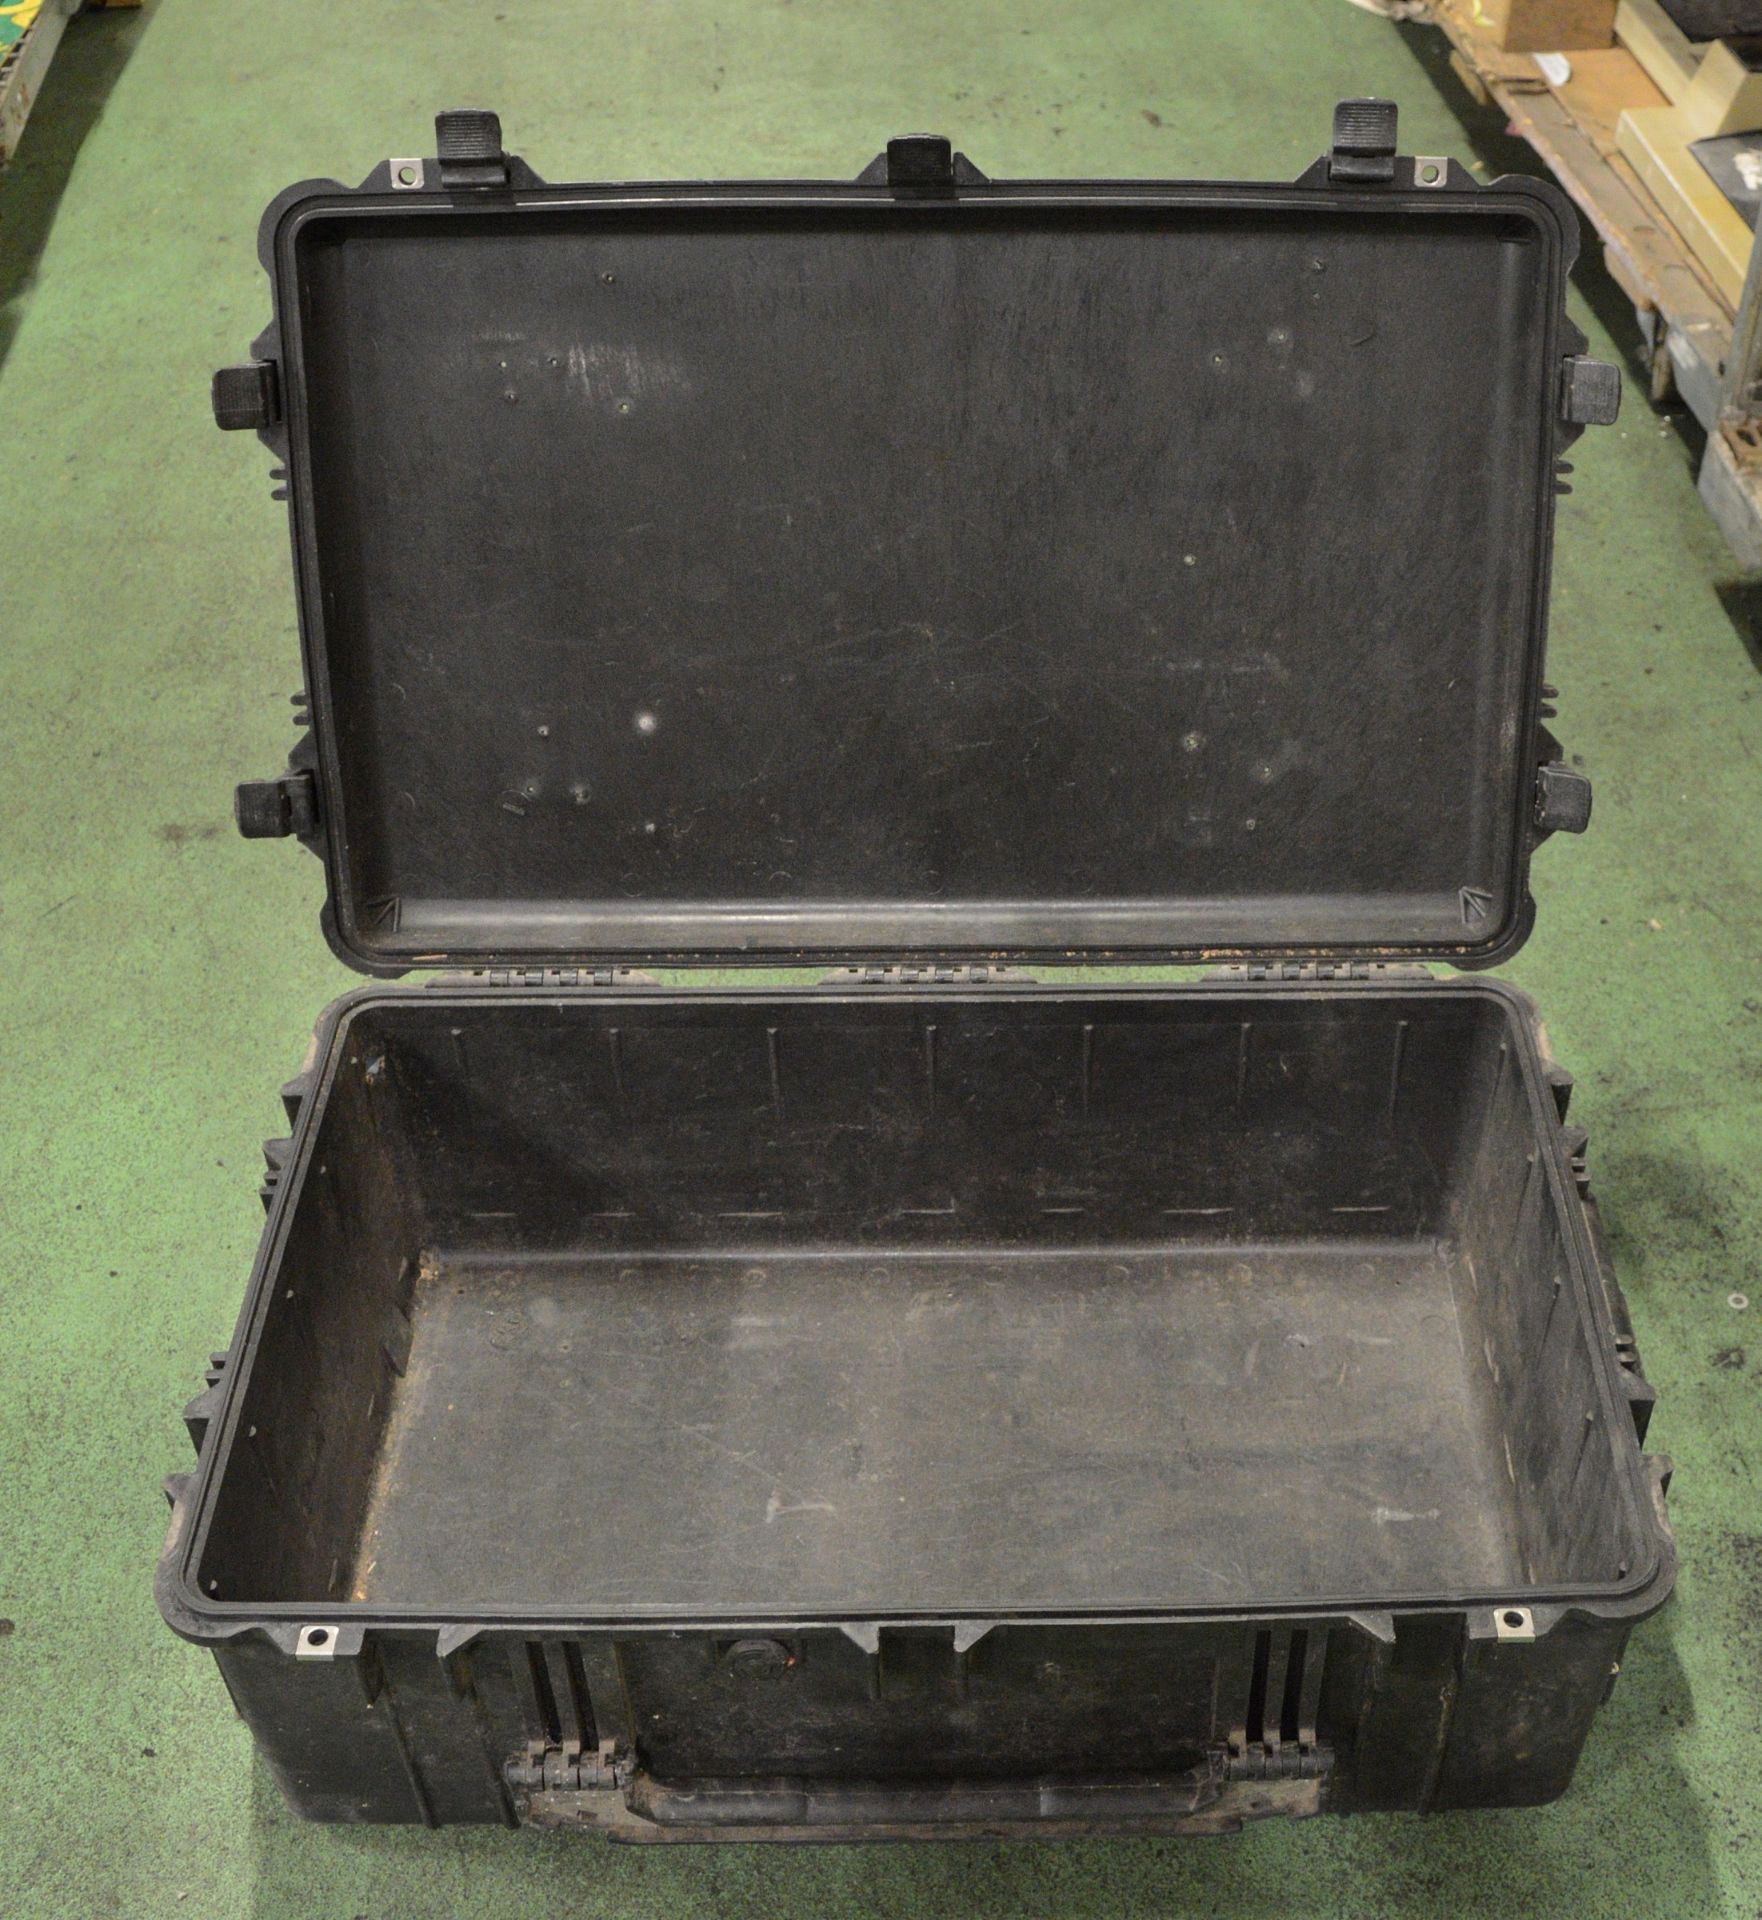 Peli Case 1650 - 760 x 450 x 280 - with wheels - NOT AIR TIGHT - Image 3 of 4